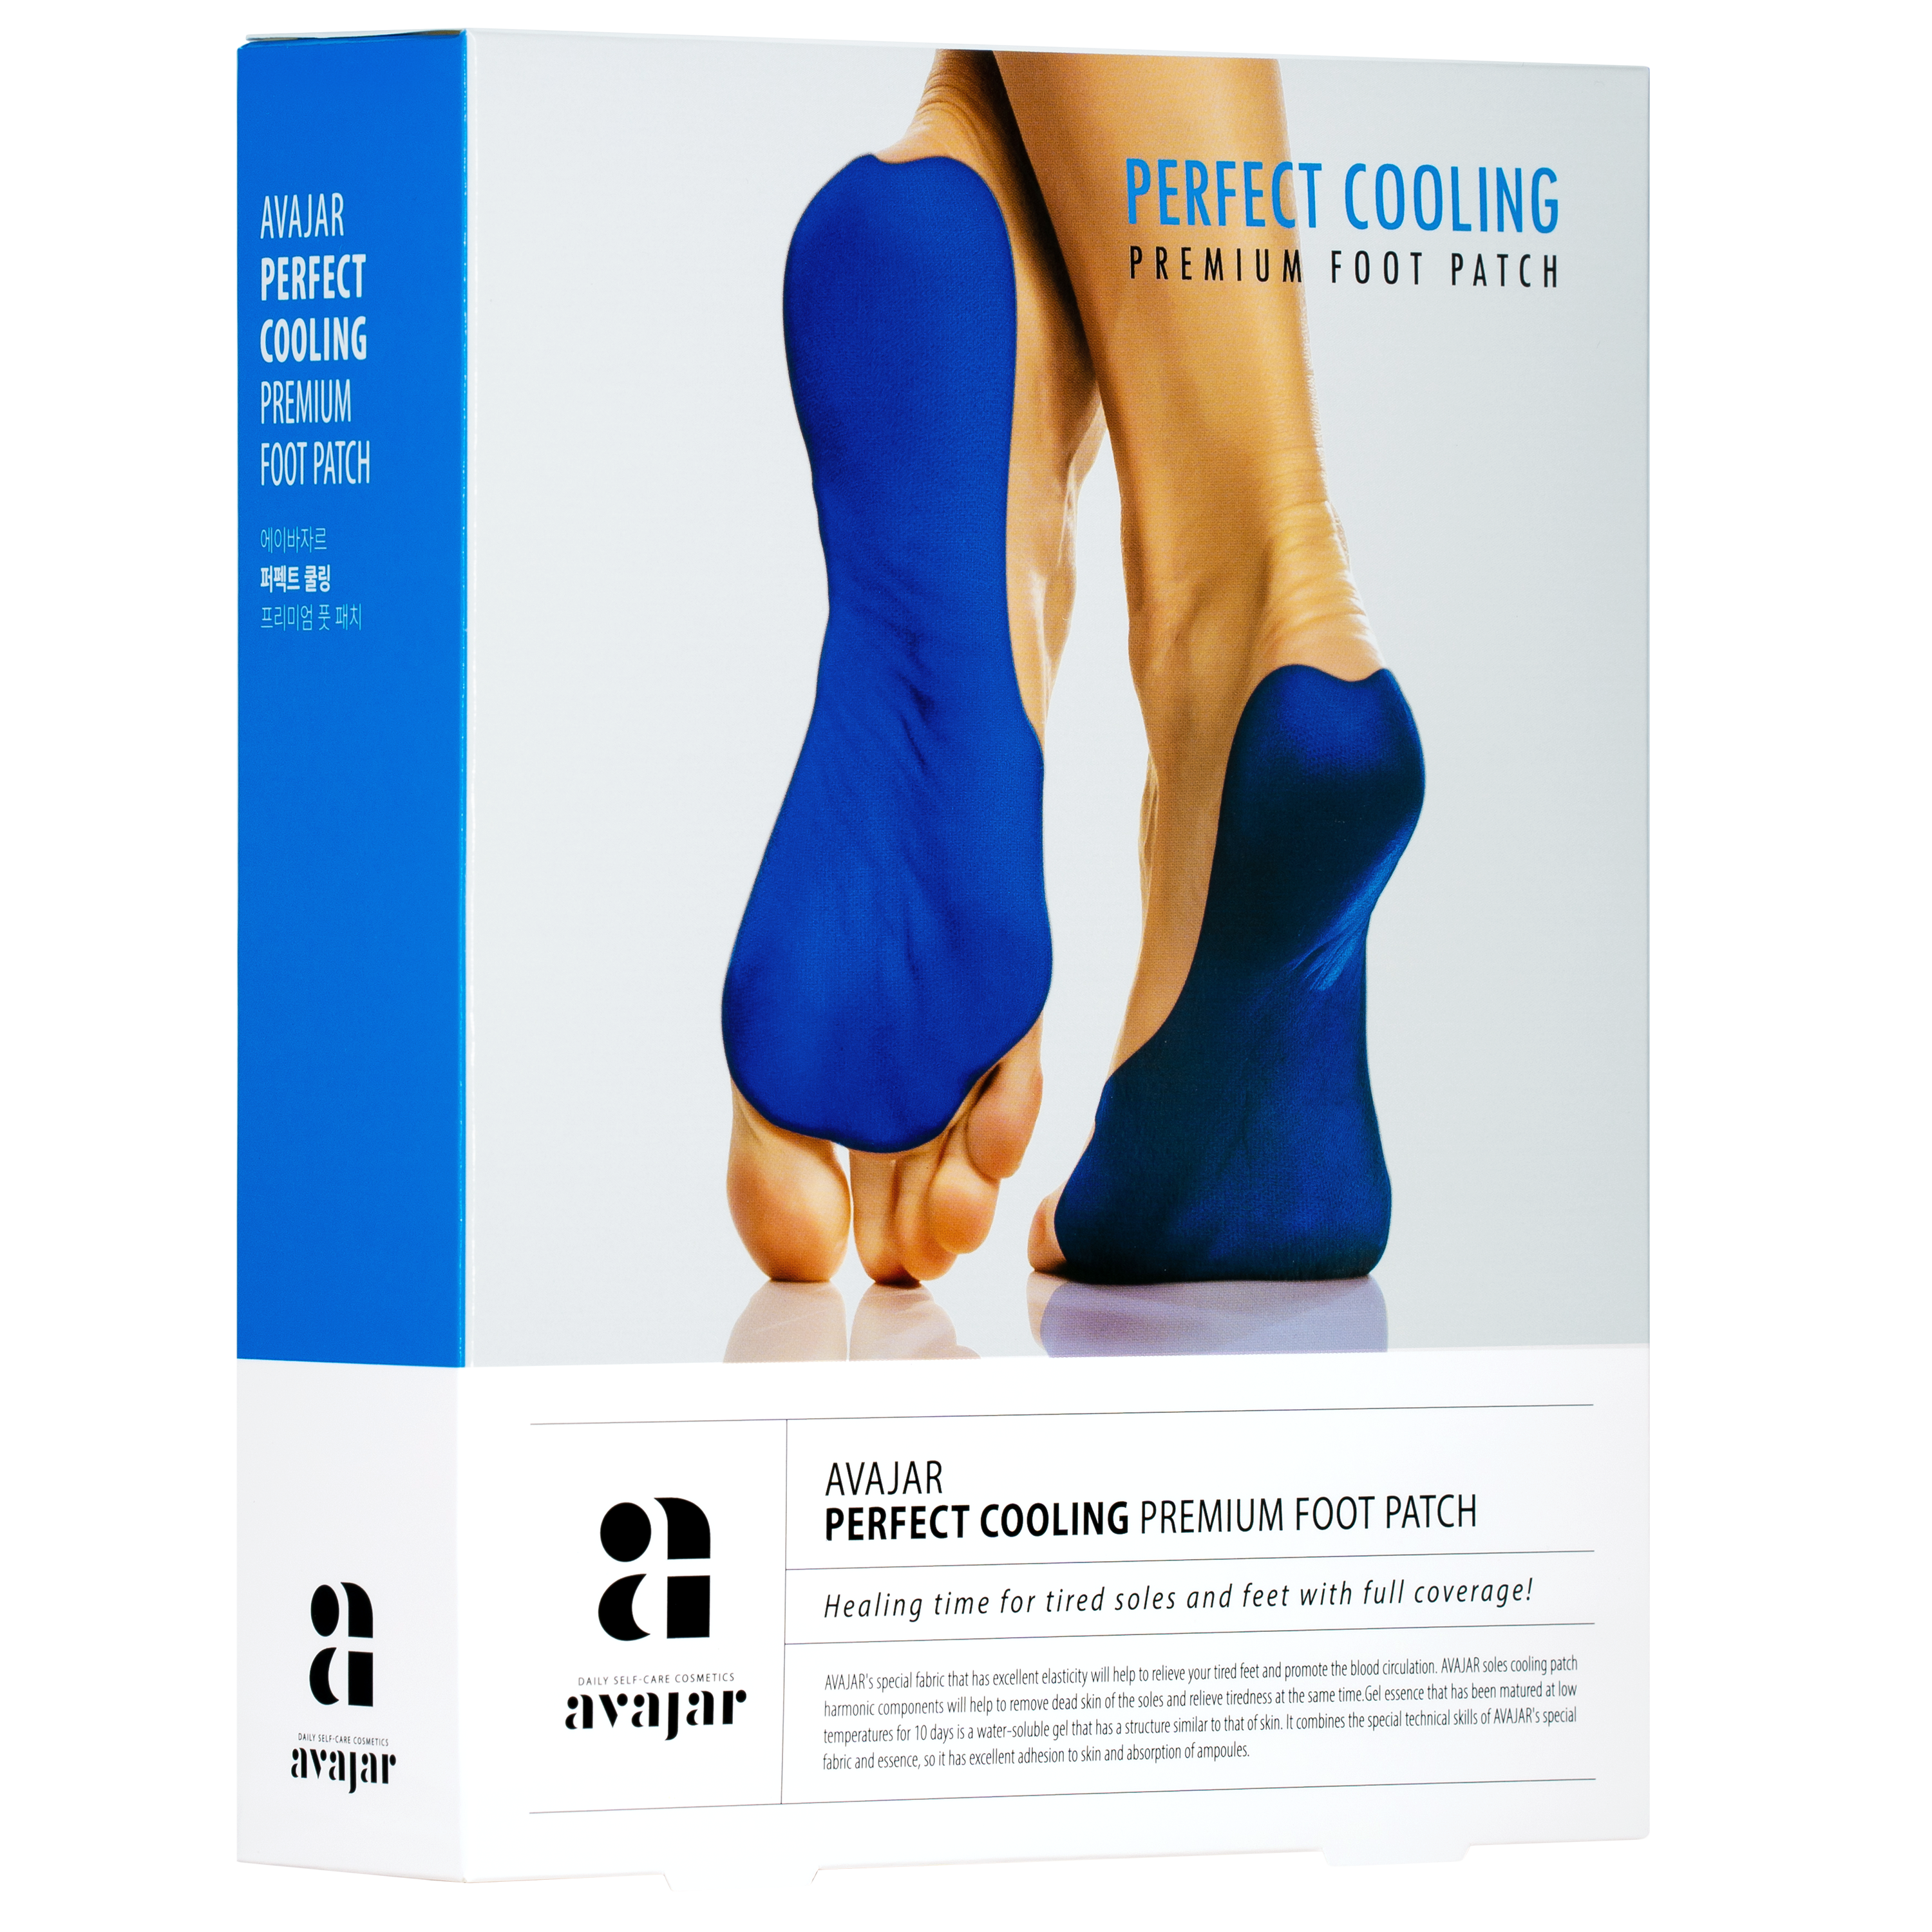 AVAJAR PERFECT COOLING PREMIUM FOOT PATCH (5EA) - Dotrade Express. Trusted Korea Manufacturers. Find the best Korean Brands